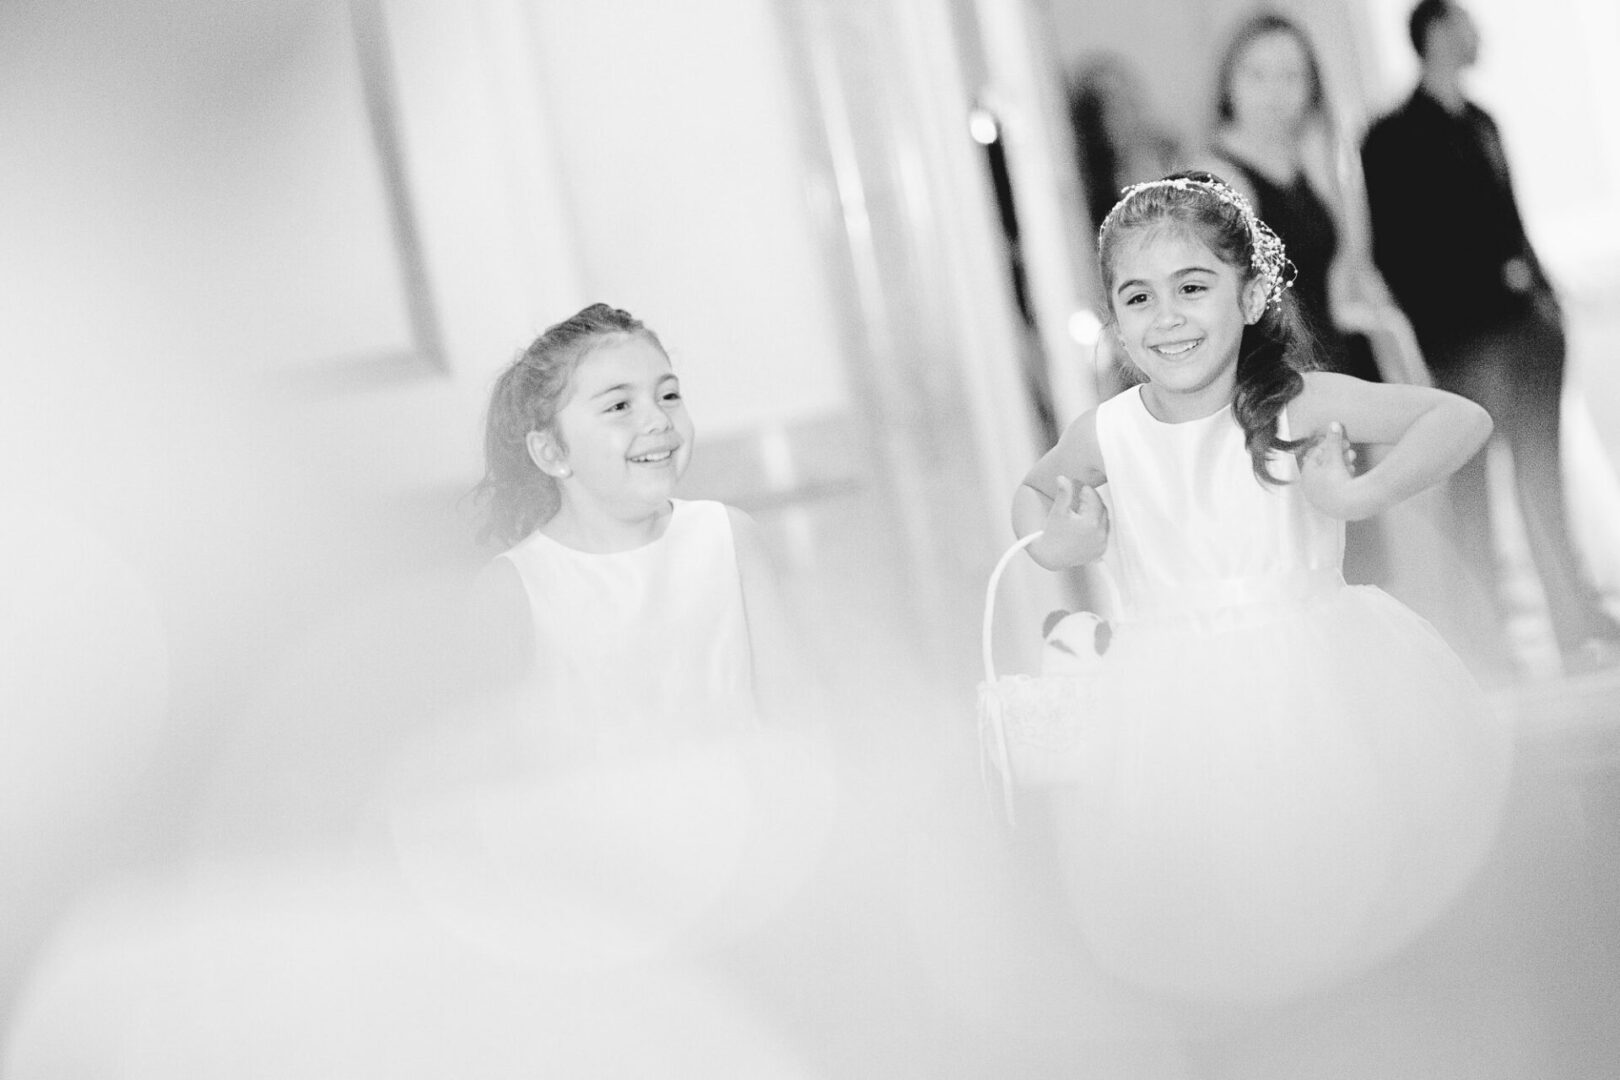 Black and white image of two girls dancing